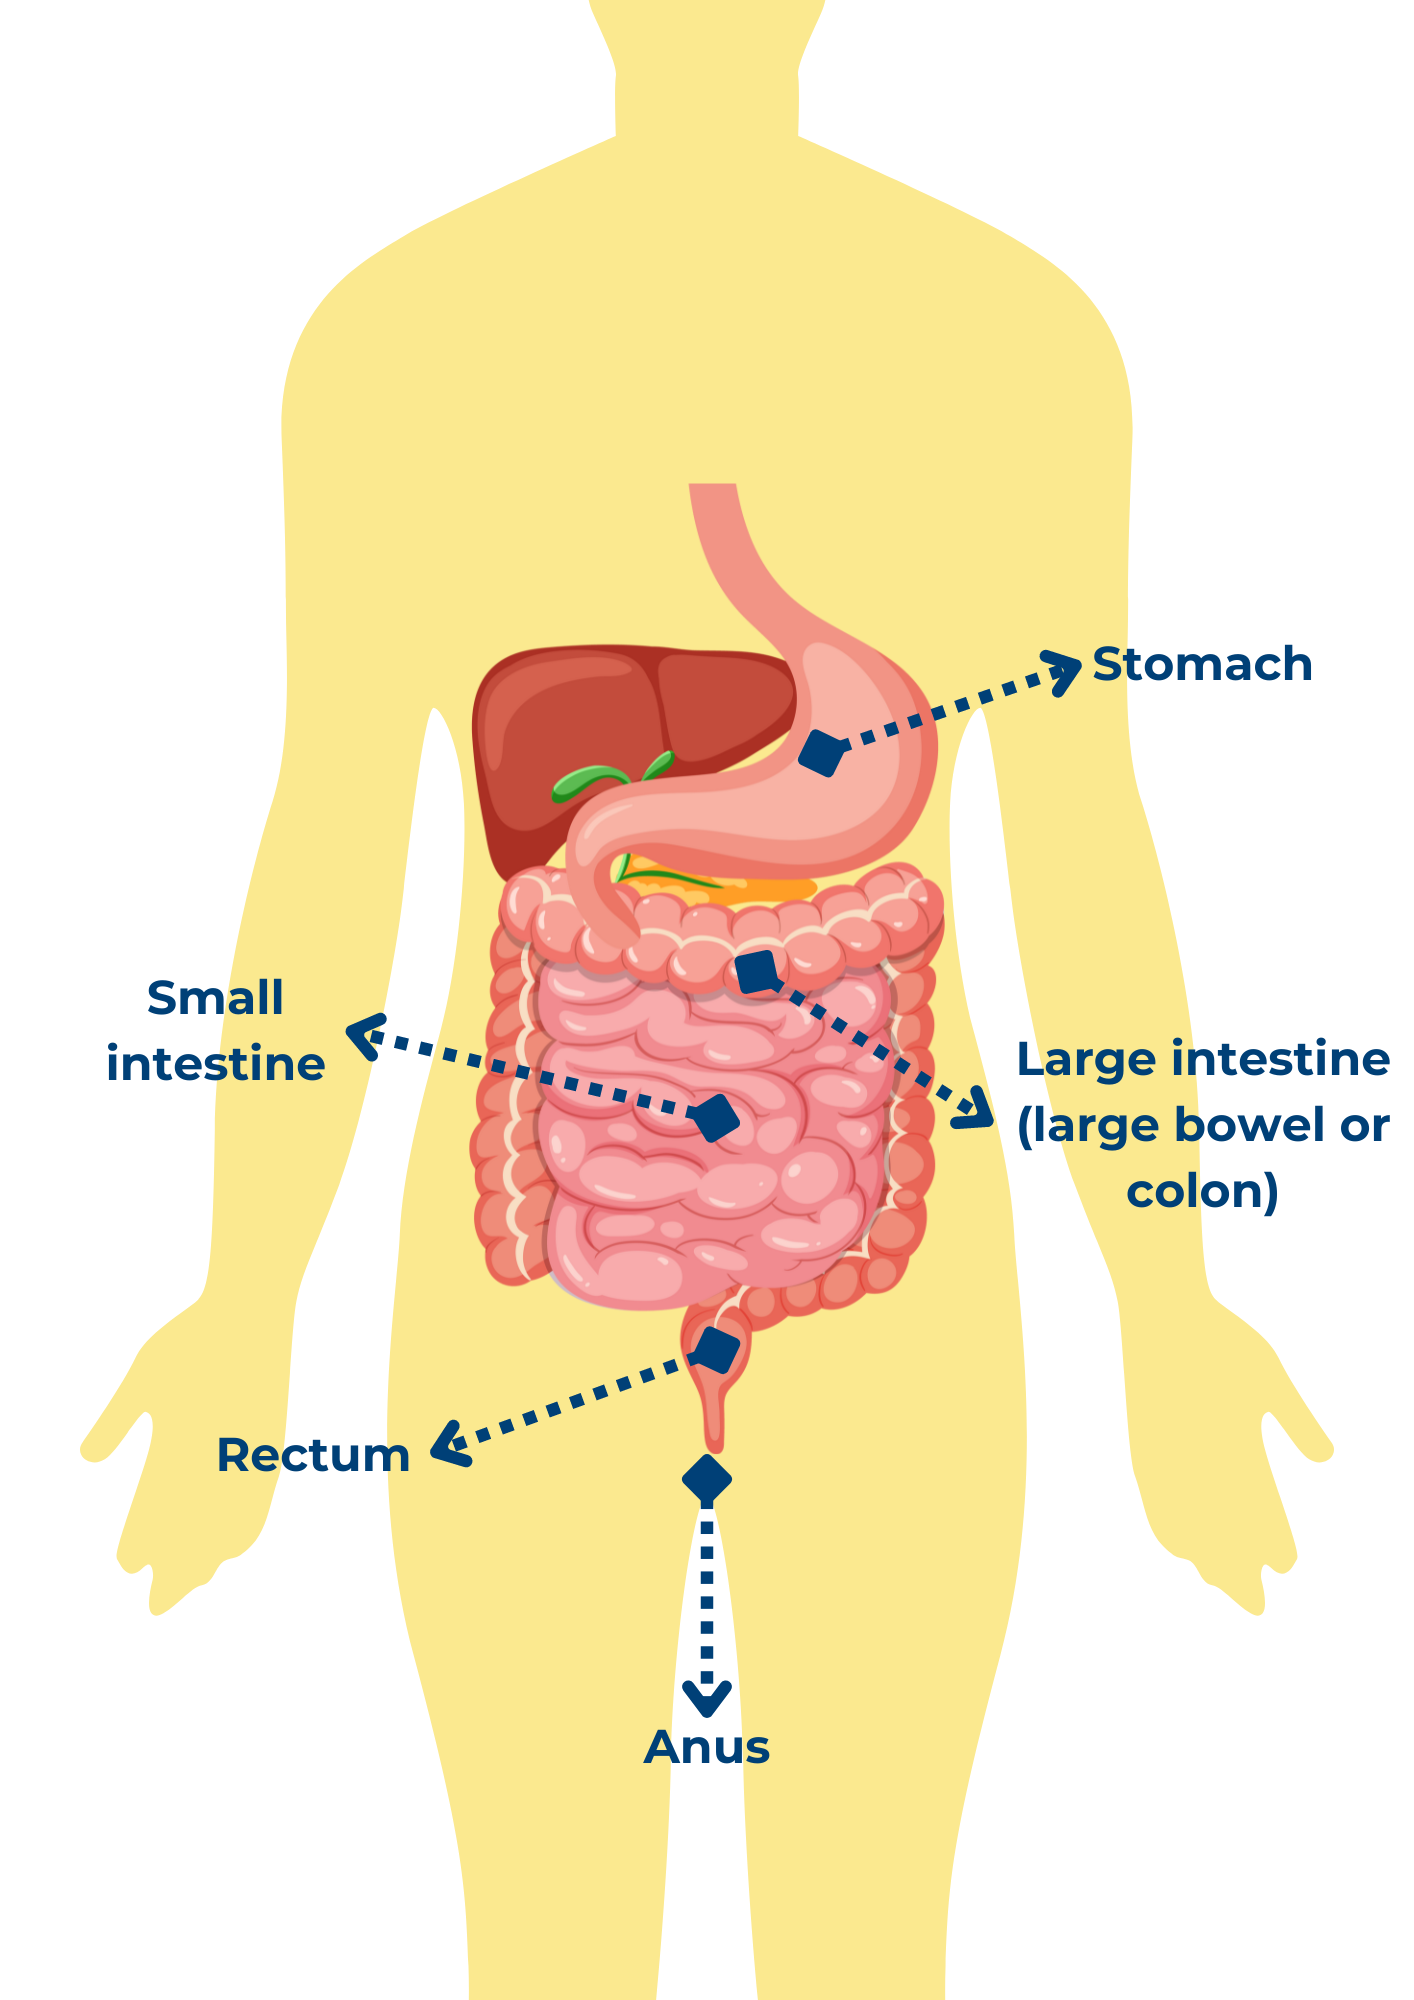 A anatomical diagram of the bowel. It includes the stomach at the top, connected to the small intestine, which is followed by the large intestine, then the rectum, and finally the anus.